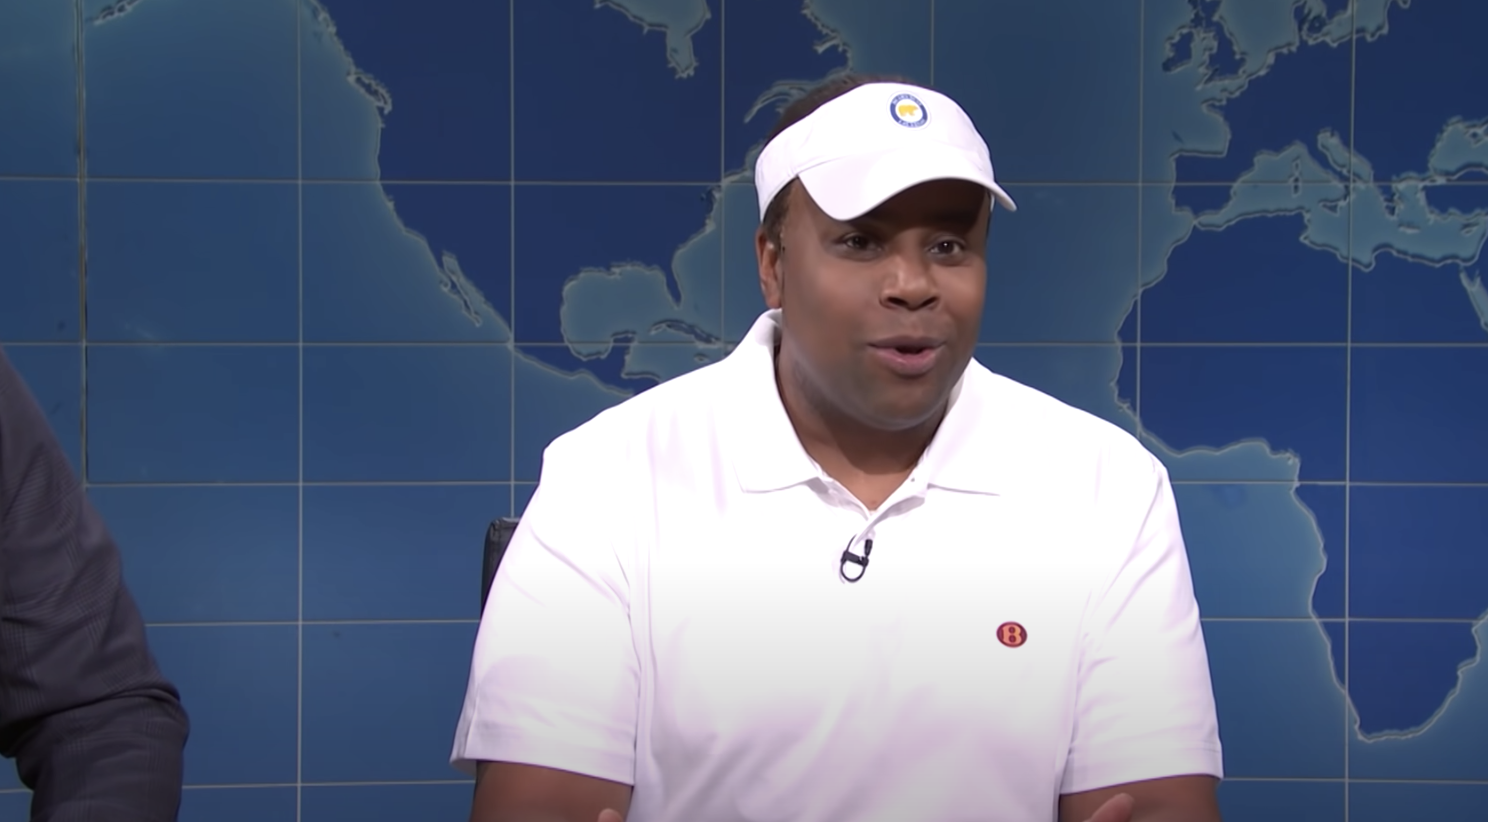 Kenan Thompson as O.J. Simpson on the weekend update on SNL